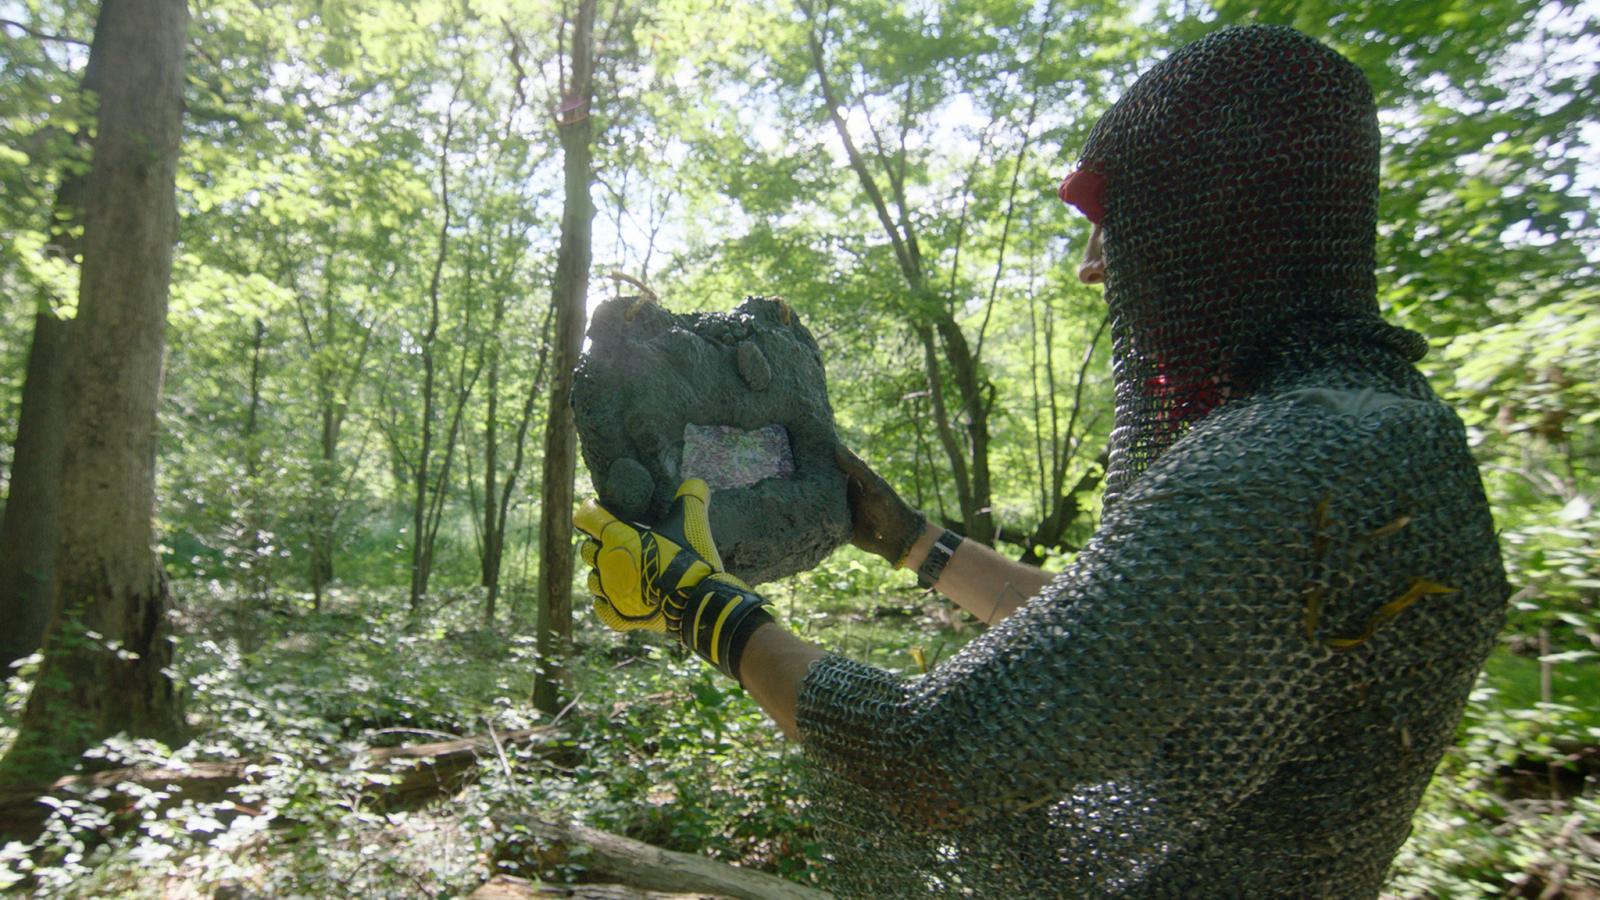 Film still from "Your Final Meditation" currently in post-production. “Your Final Meditation,” is a long form guided meditation structured as a series of video game levels. In this level, a knight character embarks on the impossible task of 3D scanning an entire forest. Filmed with a steadicam we sought to create hyper smooth images that look and feel like a 3rd person point of view in a video game. Combining live action footage, 3D scans, and digital animations this scene moves between the character documenting the world and the scans they are creating. As large tech companies seek to recreate the “real” world in the metaverse, what is lost in the process? After encountering a strange object in the forest the knight must face his imminent demise. The forest does not want to be scanned.